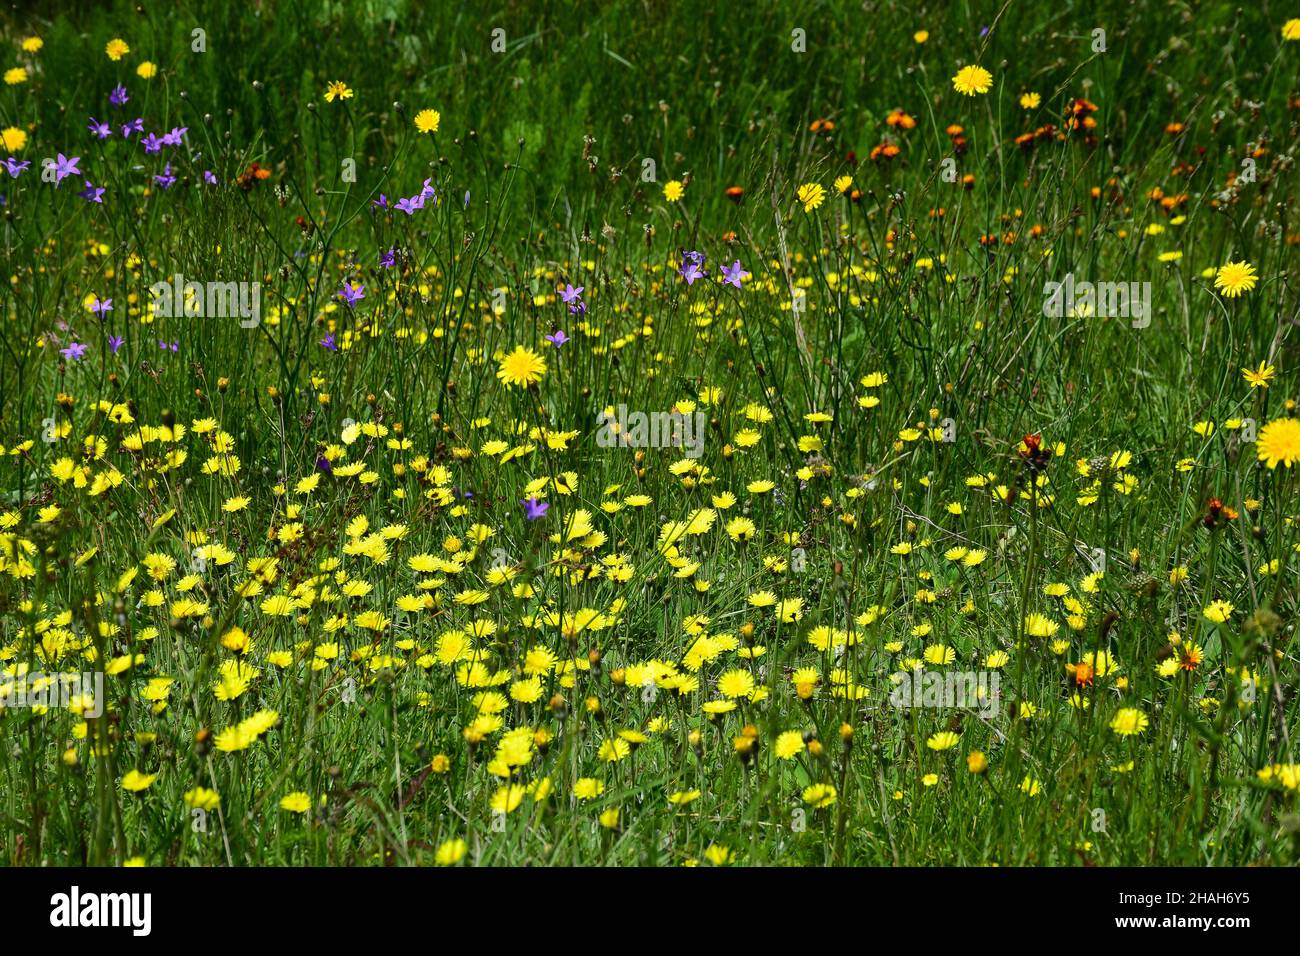 A field with a variety of wildflowers and green grass all over the frame. The background is blurred Stock Photo